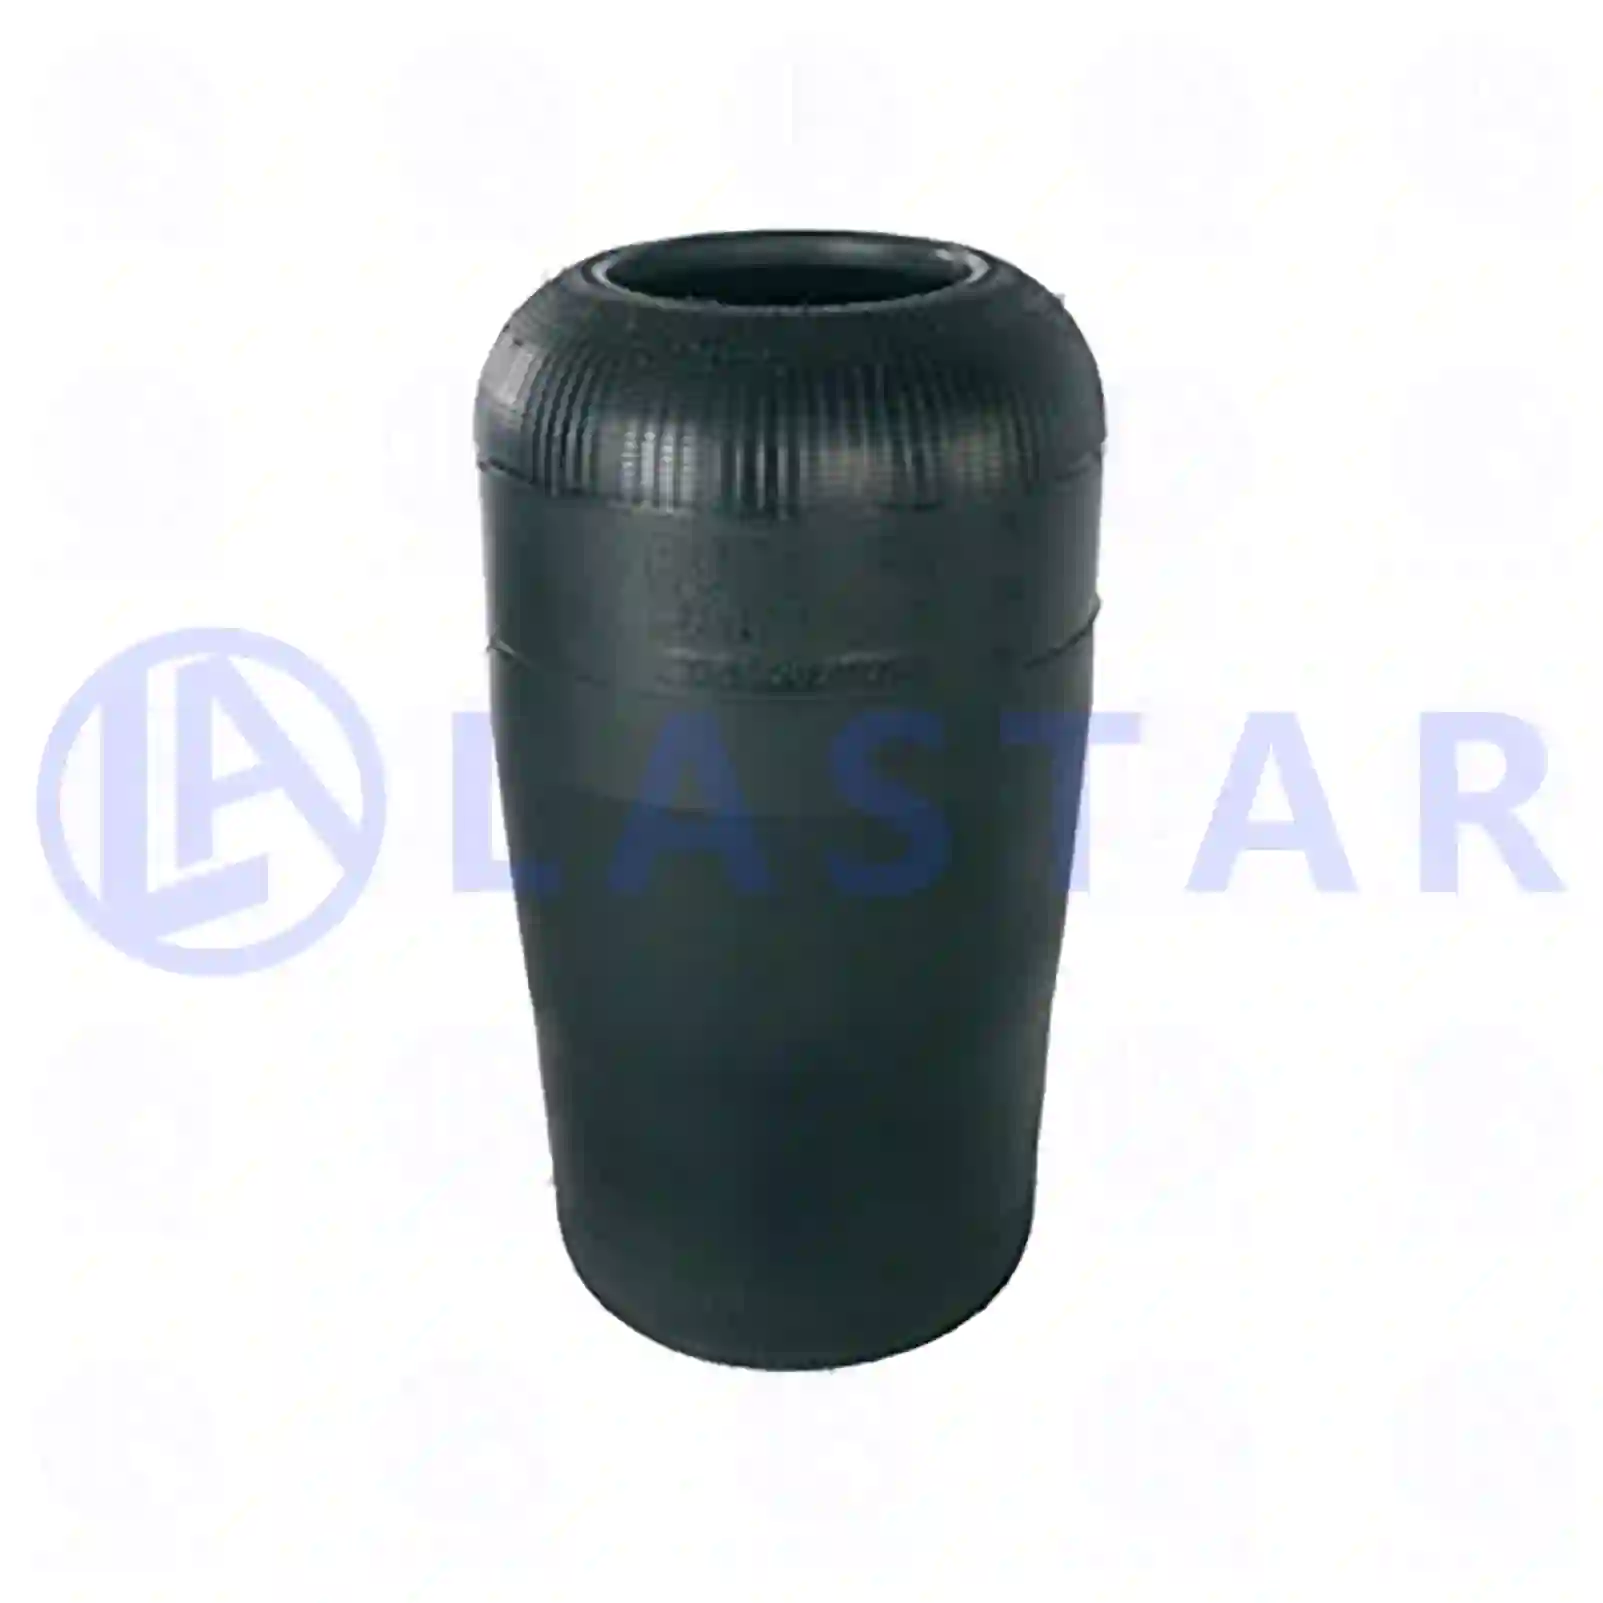 Air spring, without piston, 77728914, 08139467, 08188539, 5000301452, 5010294385, 8139467, 8188539, 97108363, 81436010066, 81436010068, 81436010106, 81436010125, 5010294385, MLF7084, ZG40825-0008 ||  77728914 Lastar Spare Part | Truck Spare Parts, Auotomotive Spare Parts Air spring, without piston, 77728914, 08139467, 08188539, 5000301452, 5010294385, 8139467, 8188539, 97108363, 81436010066, 81436010068, 81436010106, 81436010125, 5010294385, MLF7084, ZG40825-0008 ||  77728914 Lastar Spare Part | Truck Spare Parts, Auotomotive Spare Parts